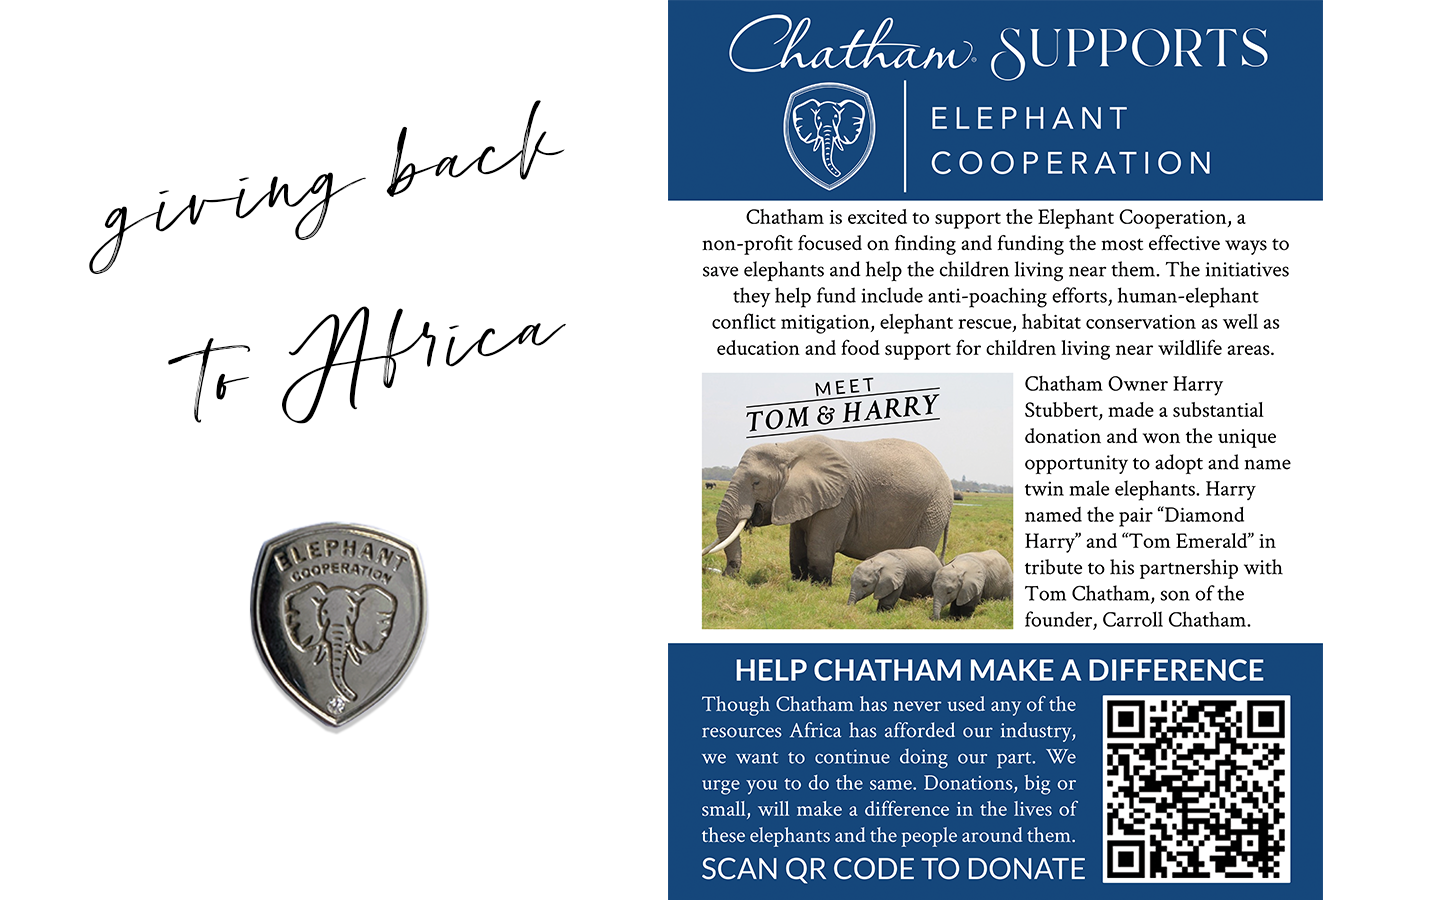 Giving Back to Africa - Chatham Supports Elephant Cooperation